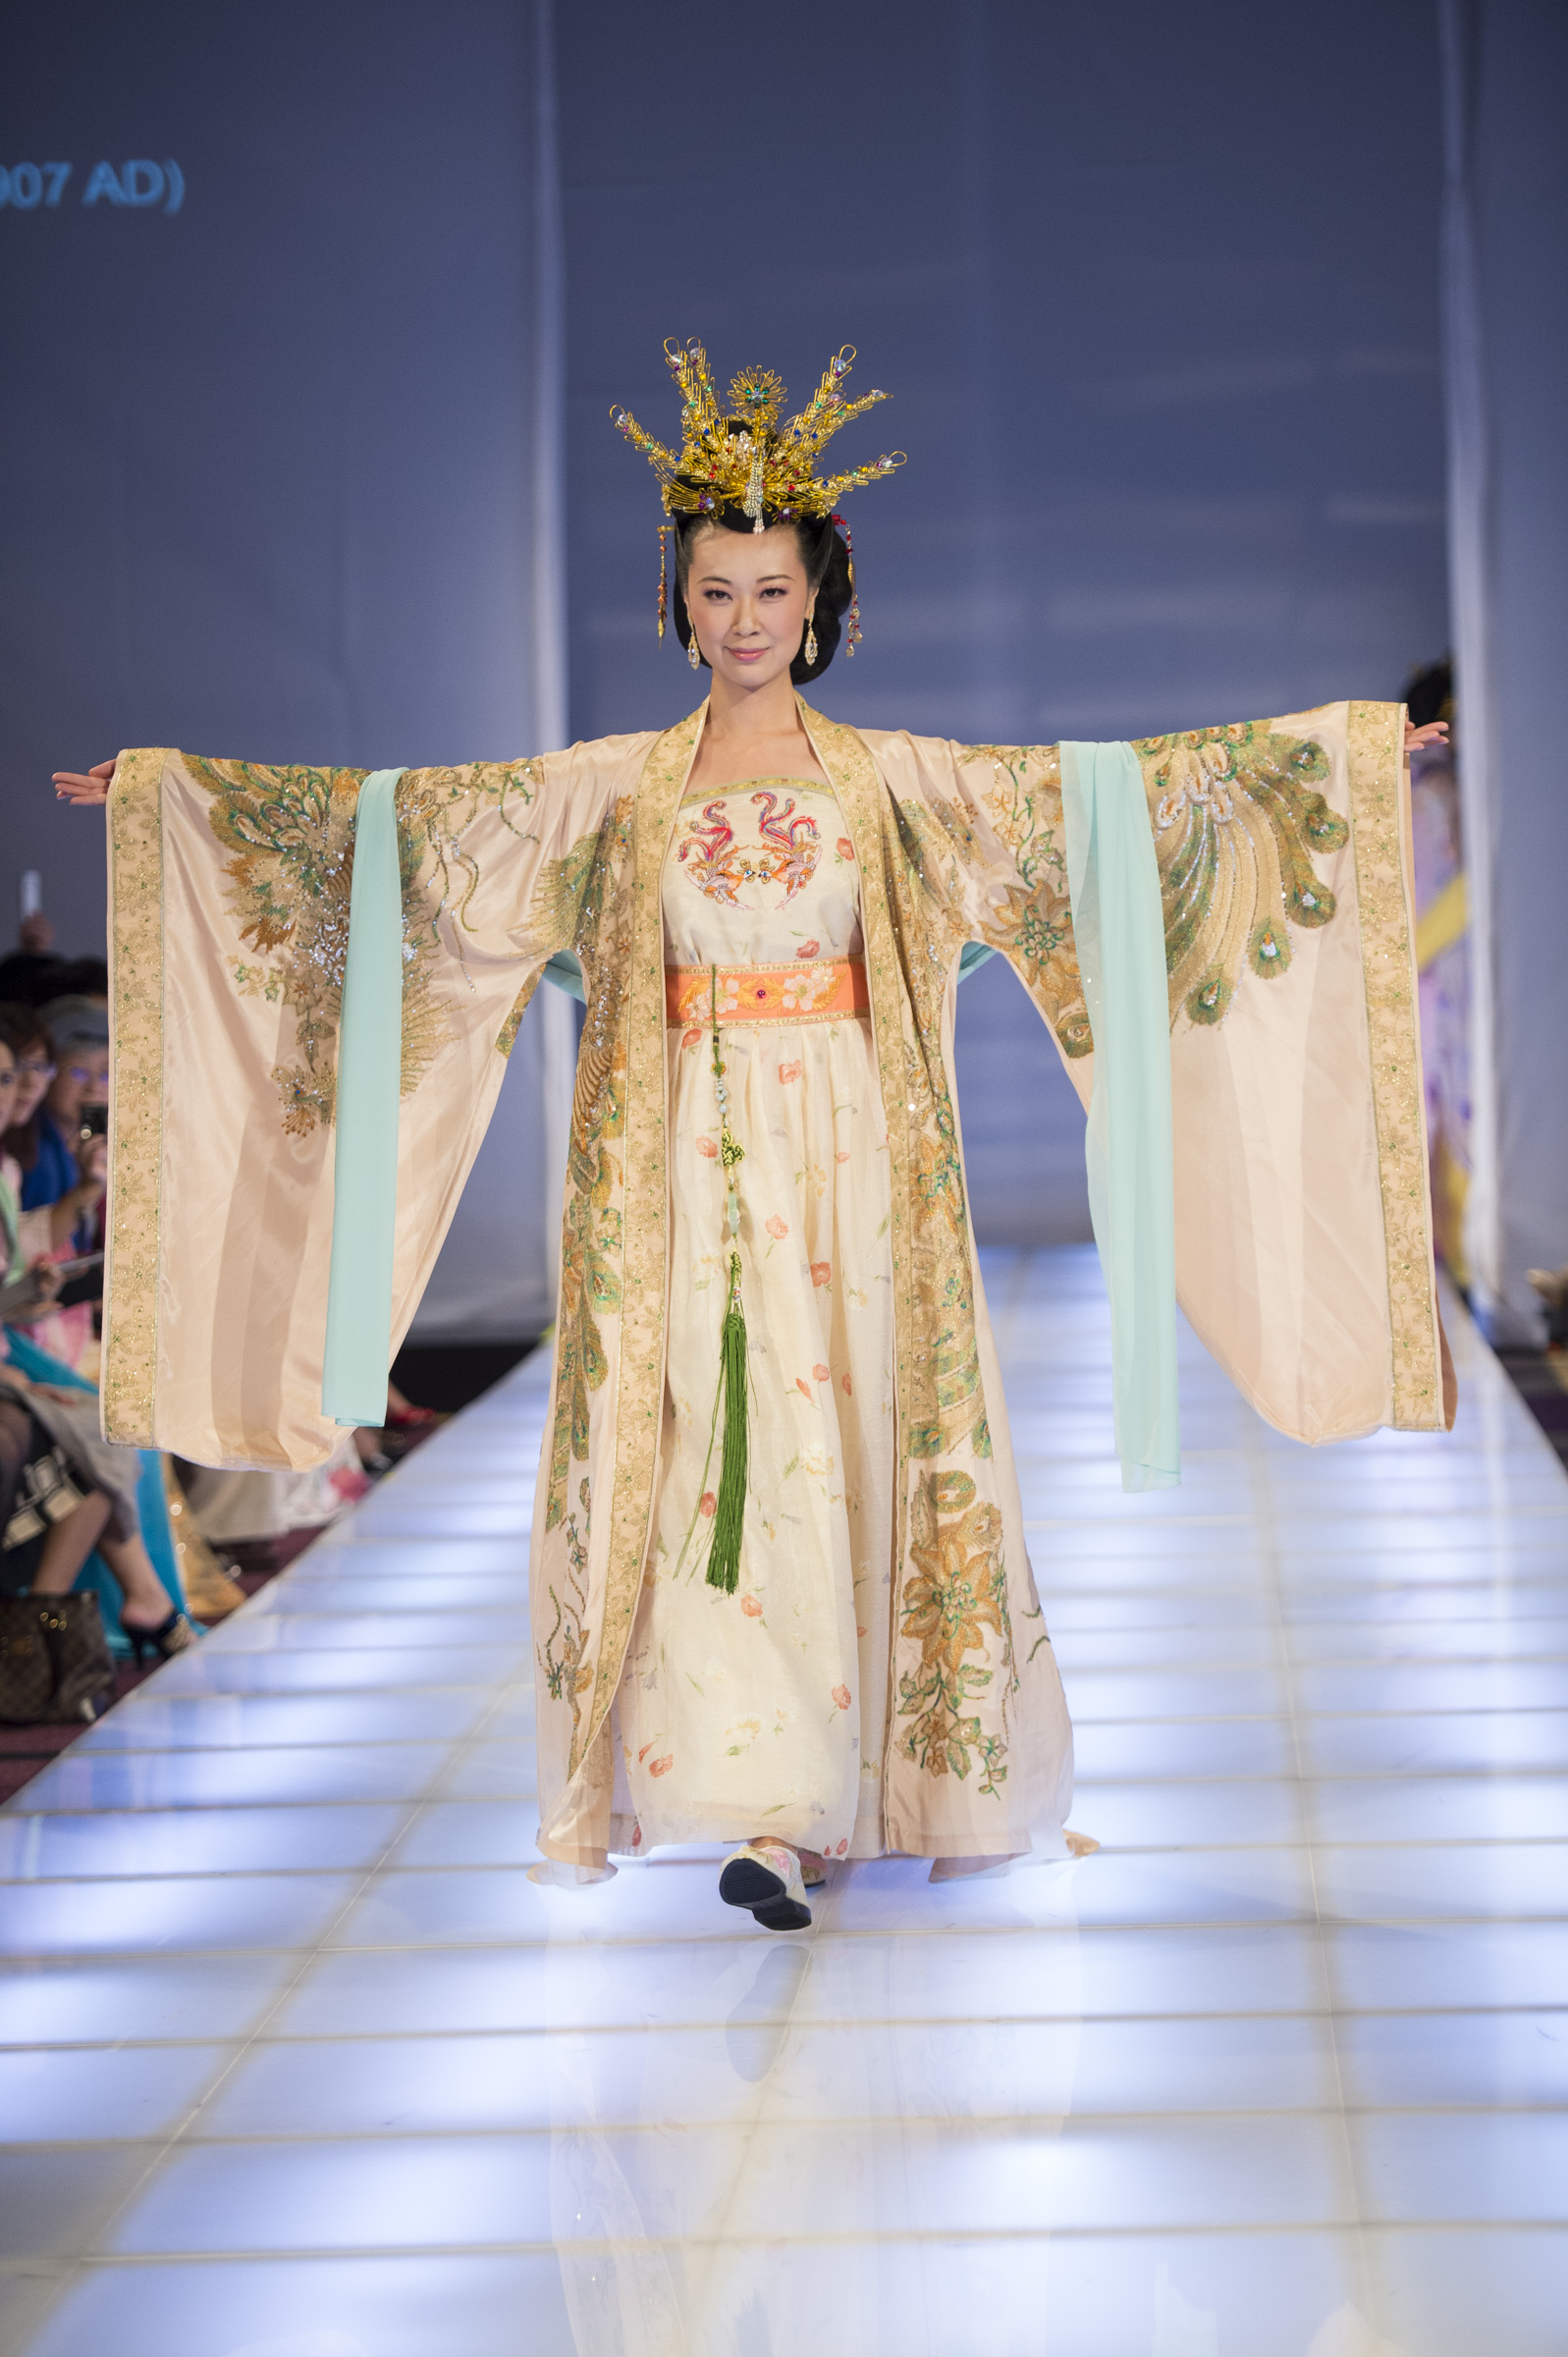 The Met’s Chinese Fashion Exhibit Neglects 94 Percent of Chinese ...